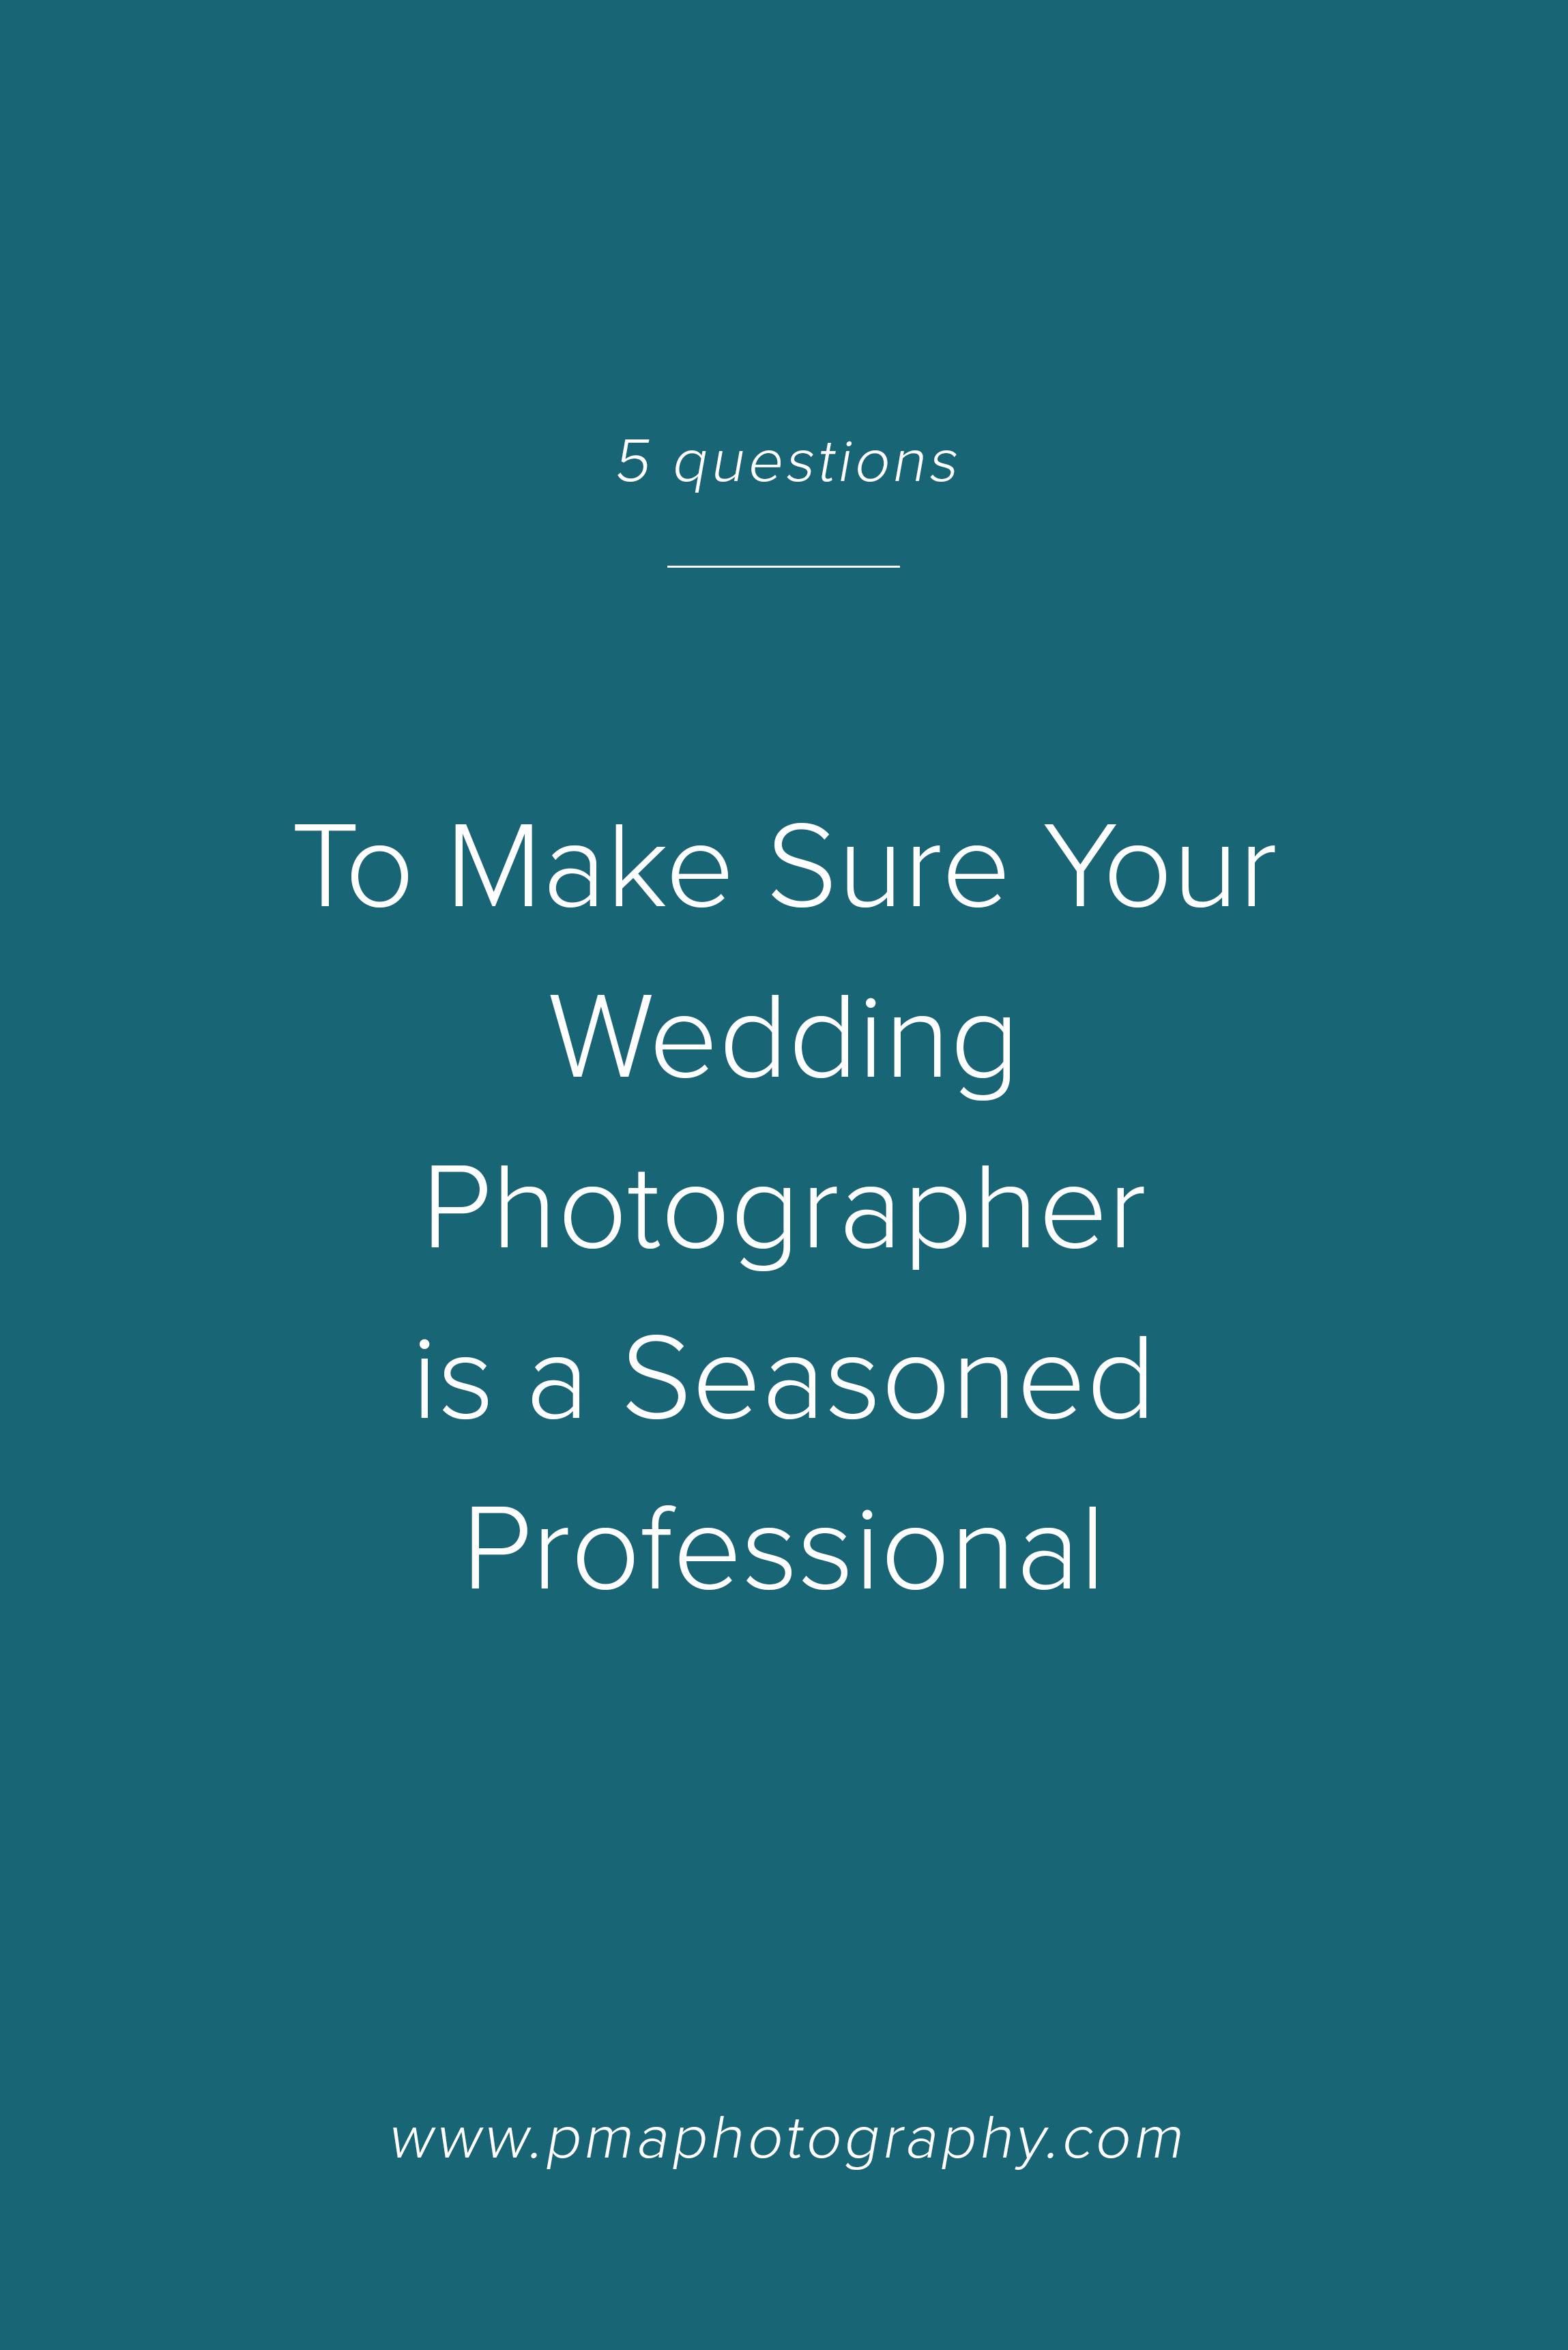 How to make sure you wedding photographer is a seasoned professional.  